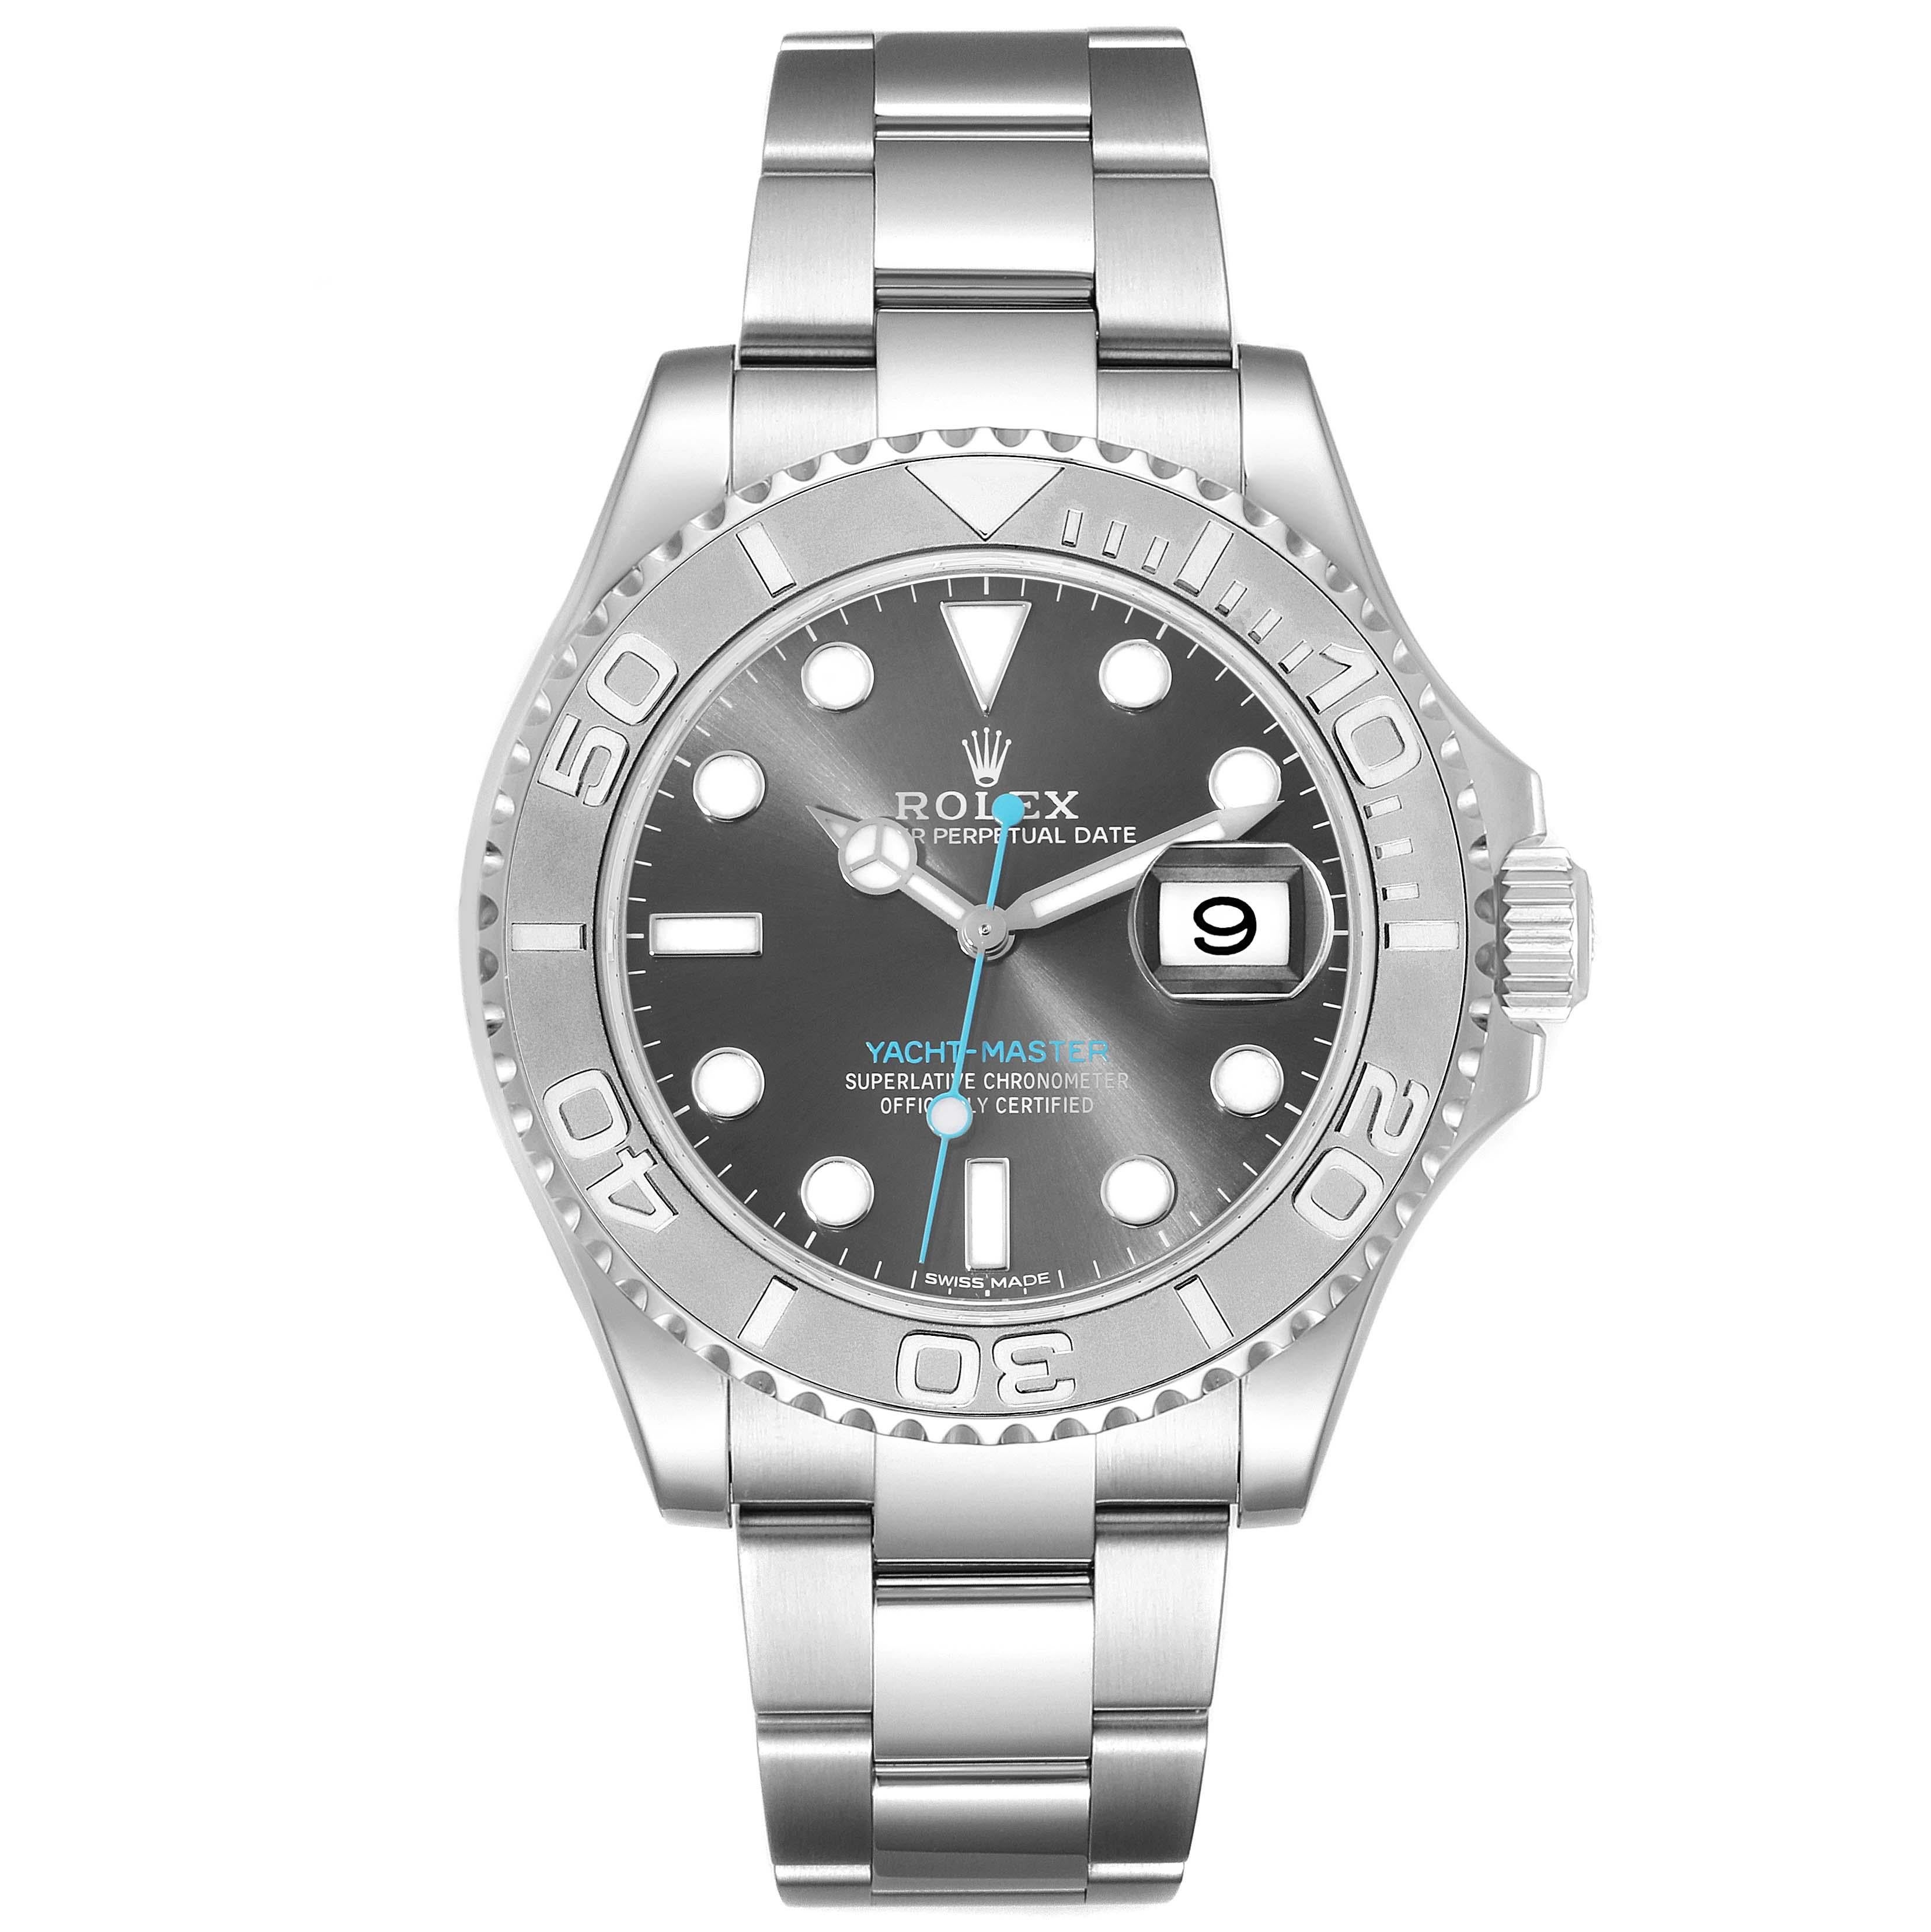 Rolex Yachtmaster Rhodium Dial Steel Platinum Mens Watch 116622 Box Card. Officially certified chronometer automatic self-winding movement. Stainless steel case 40.0 mm in diameter. Rolex logo on a crown. Platinum special time-lapse bidirectional